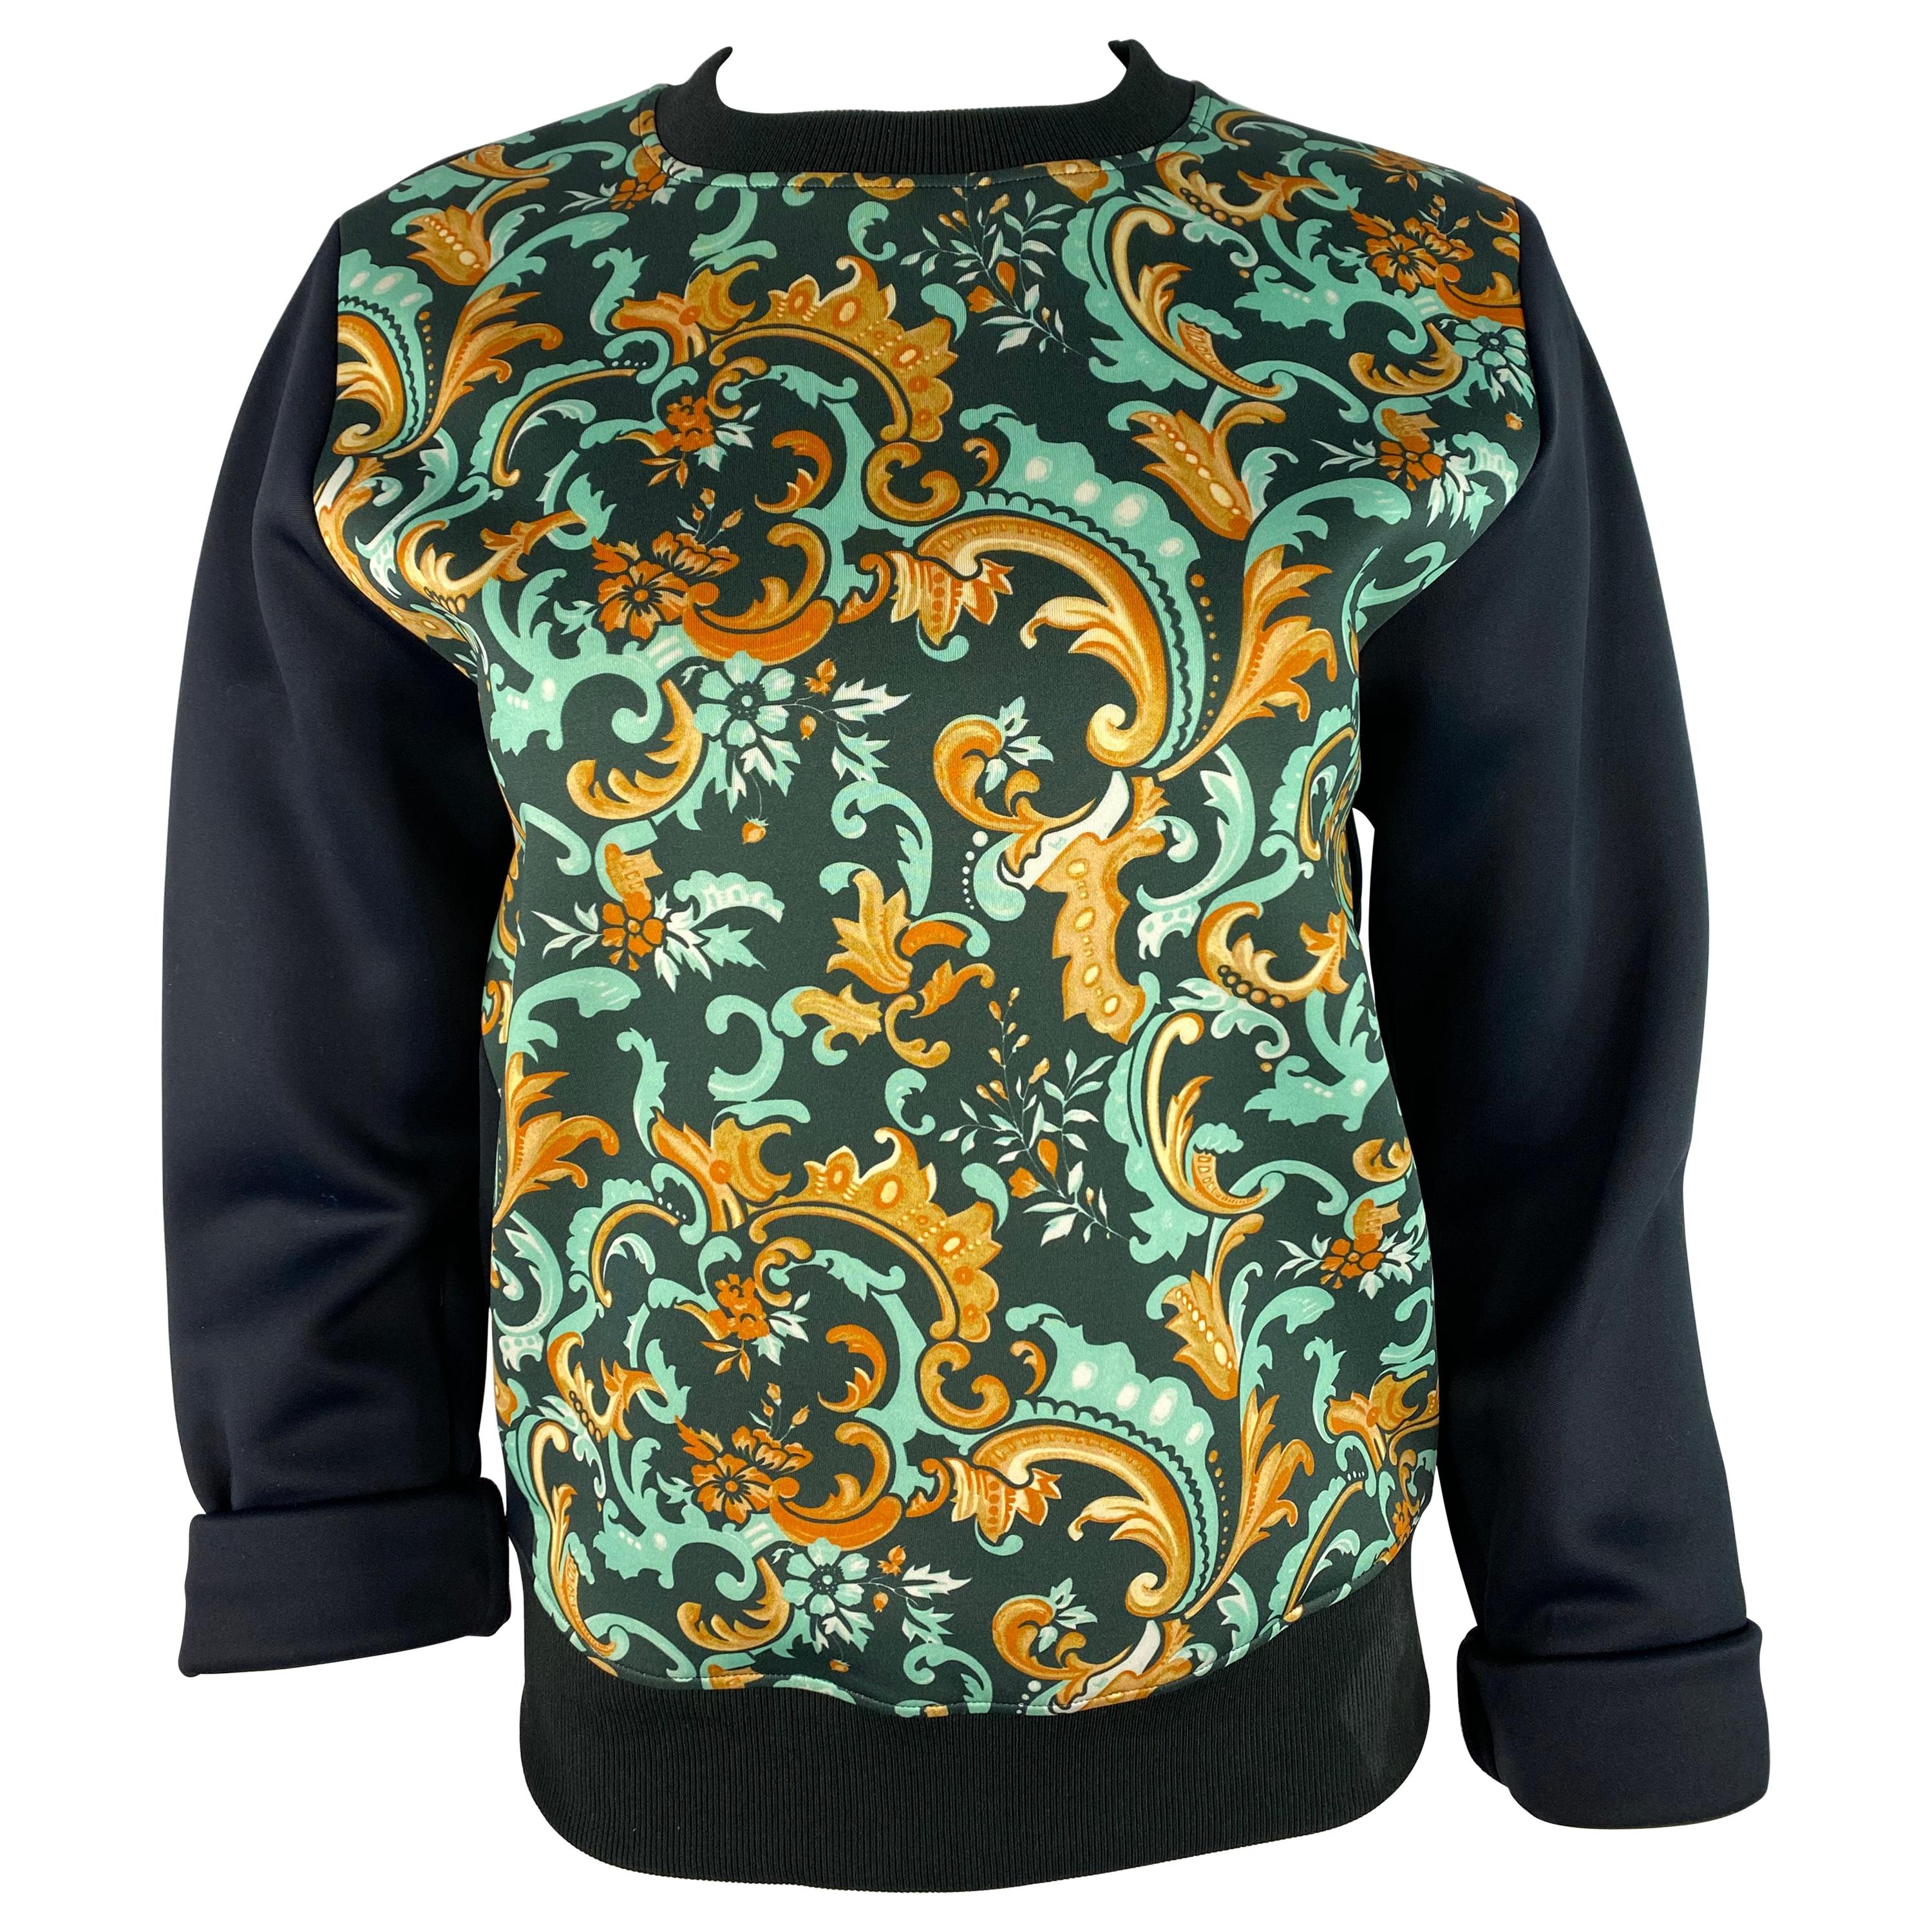 Paco Rabanne Navy and Multicolor Long Sleeves Sweatshirt Top, Size 38 For Sale